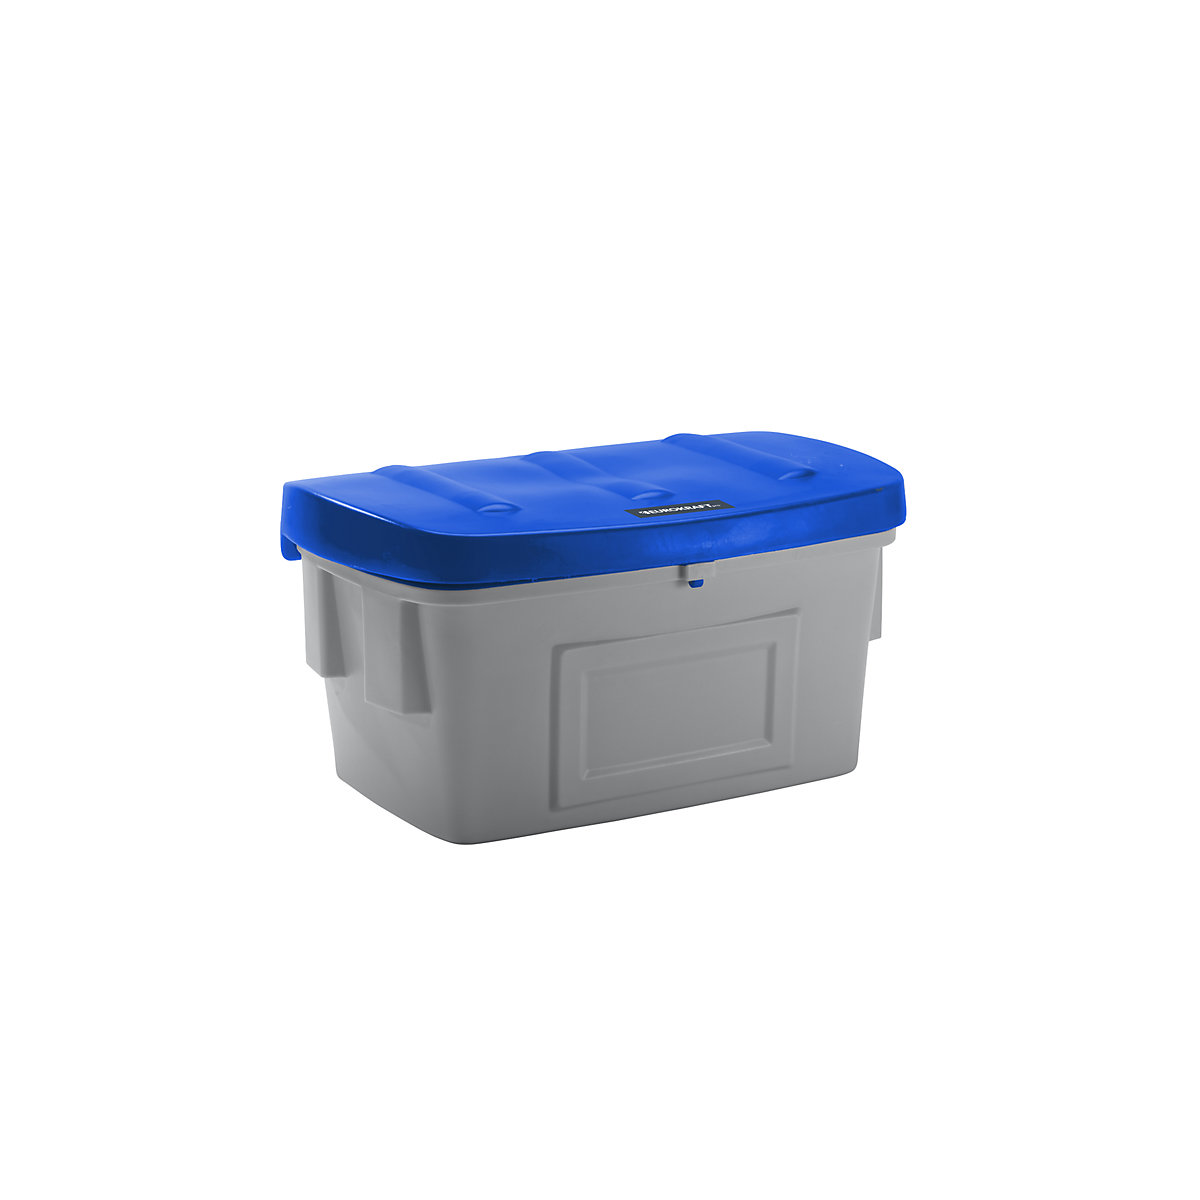 Universal / grit container – eurokraft pro, without dispenser opening, 400 l, blue lid-7